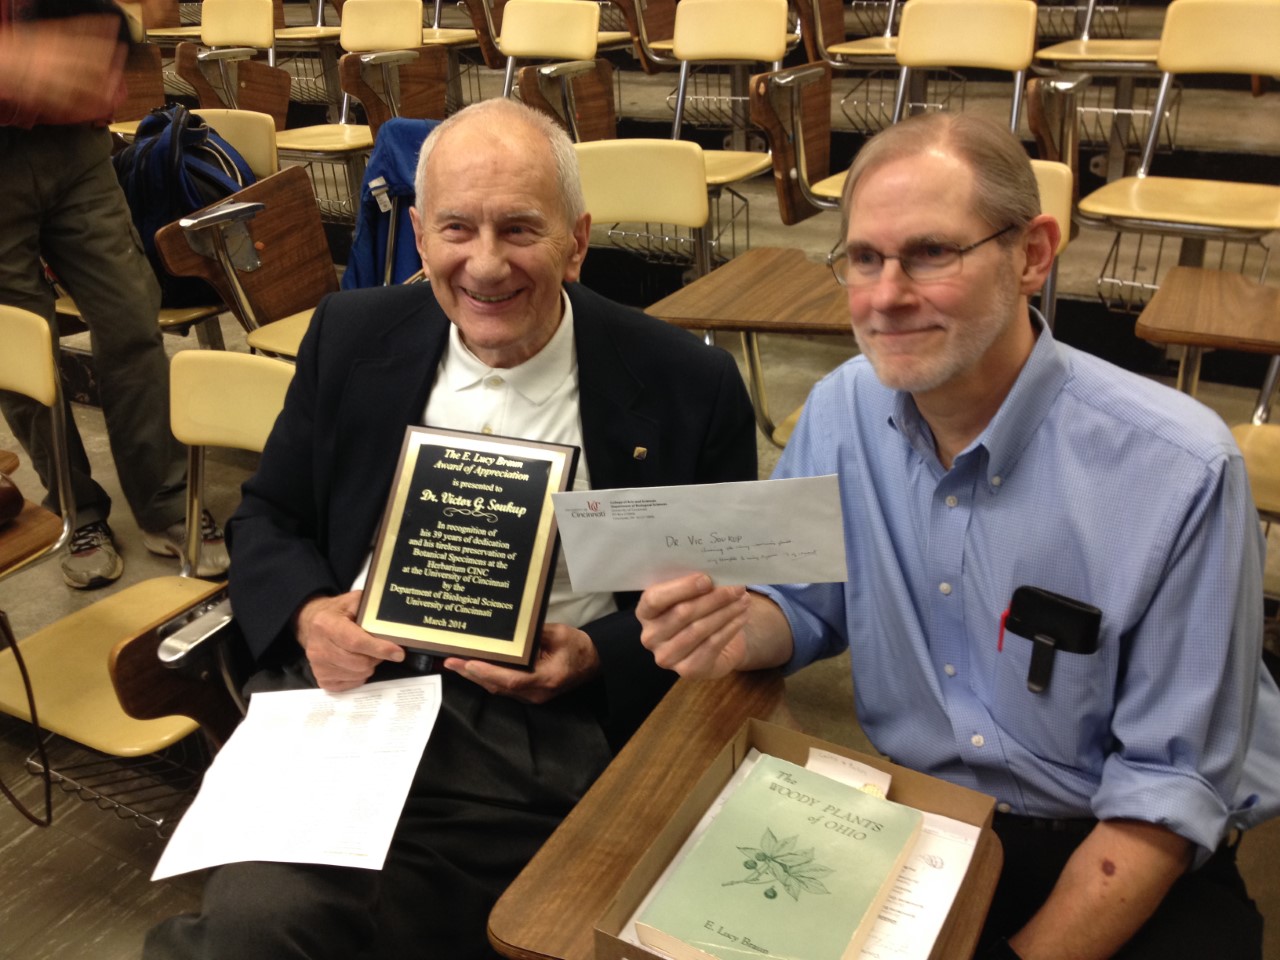 Dr. Soukup receiving an award for his dedication of 39 years to the herbarium. He is pictured with Dr. Steven H. Rogstad.